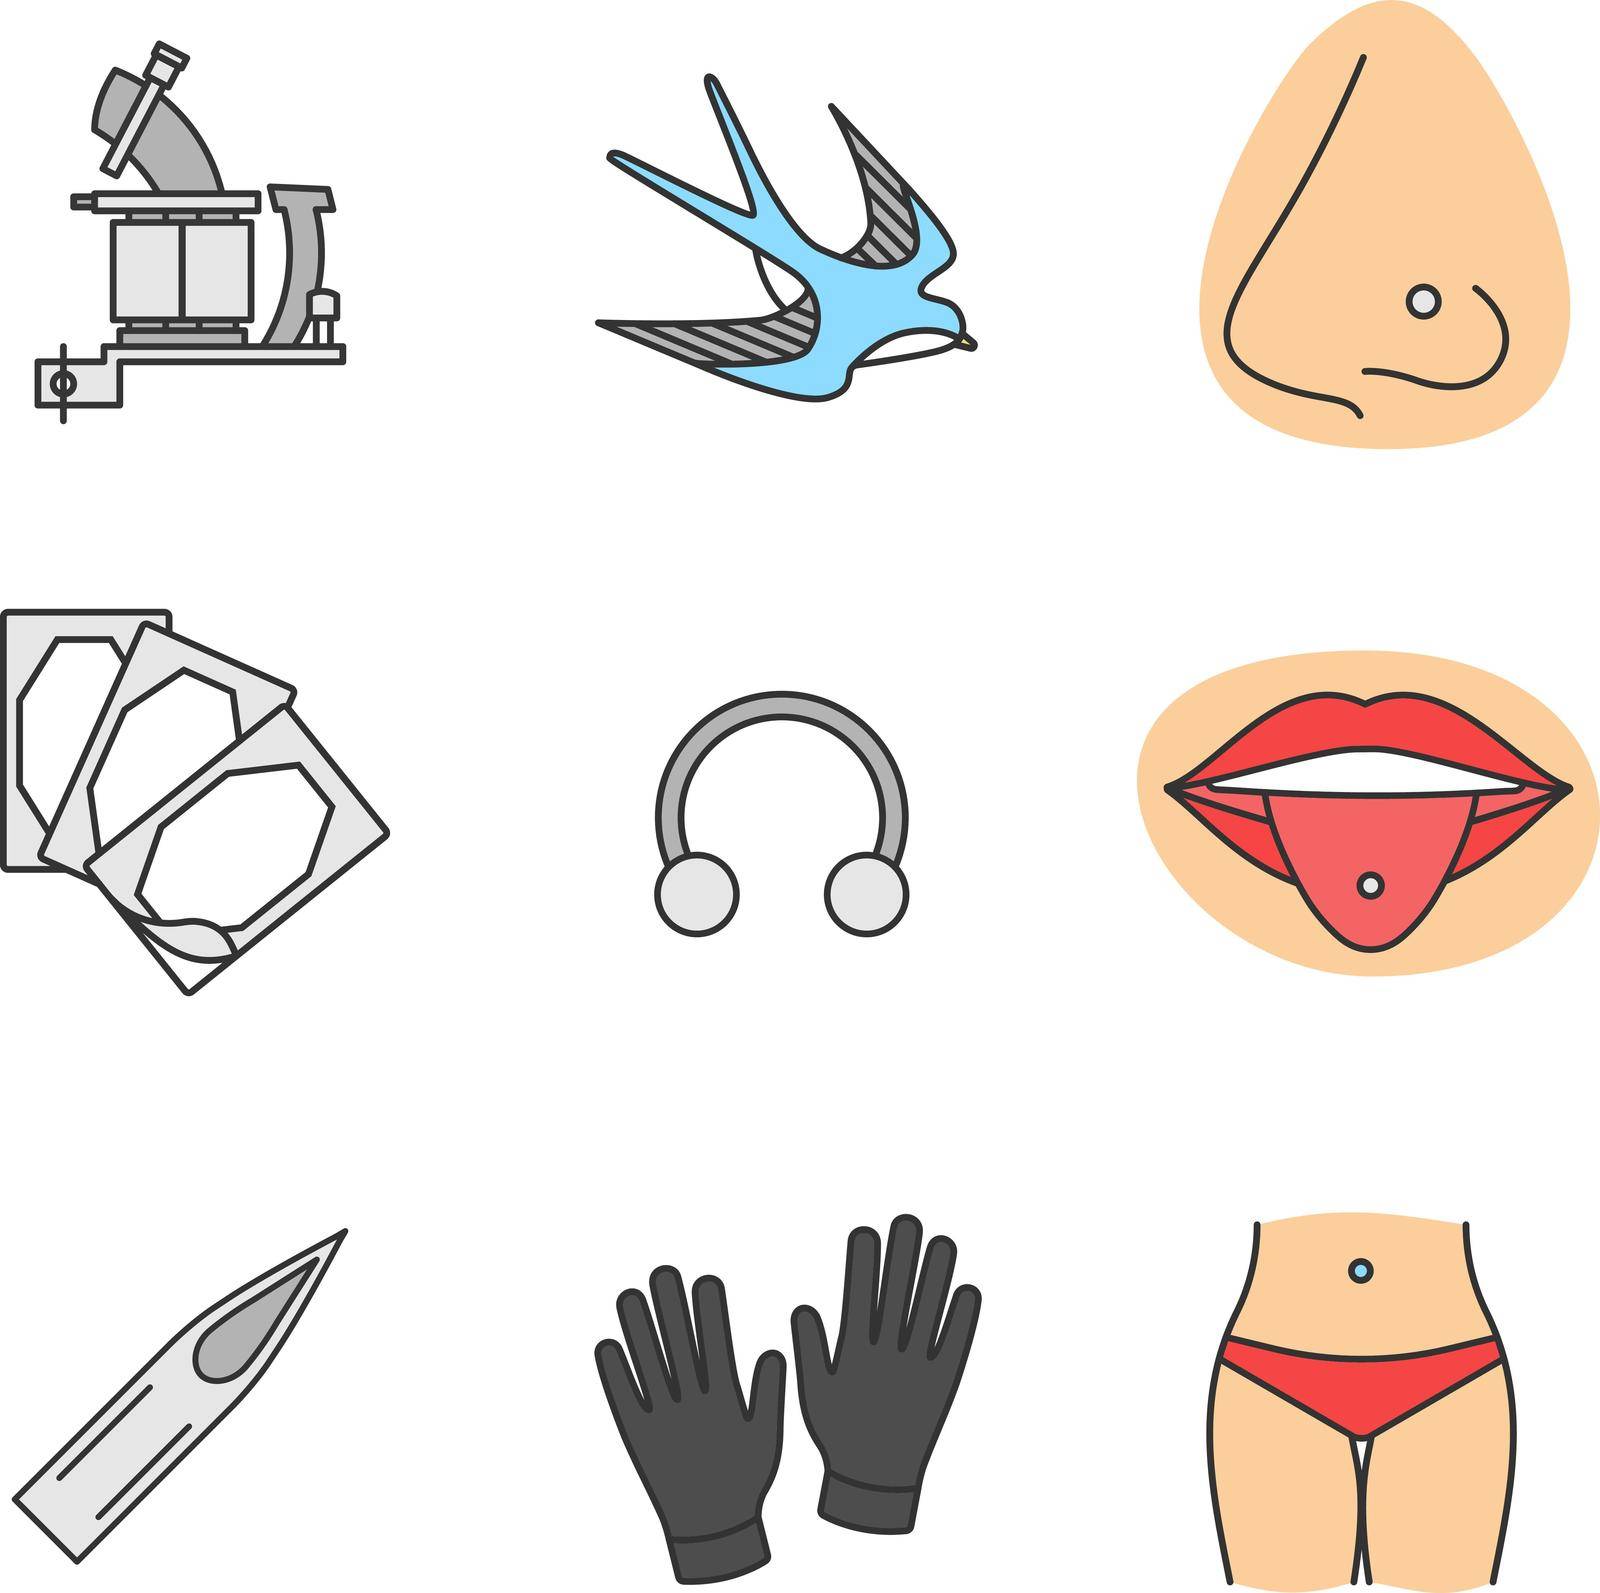 Tattoo studio color icons set. Tattoo machine, swallow sketch, pierced nose and tongue, repair sticker, half hoop ring, needle tip, medical gloves, navel piercing. Isolated vector illustrations